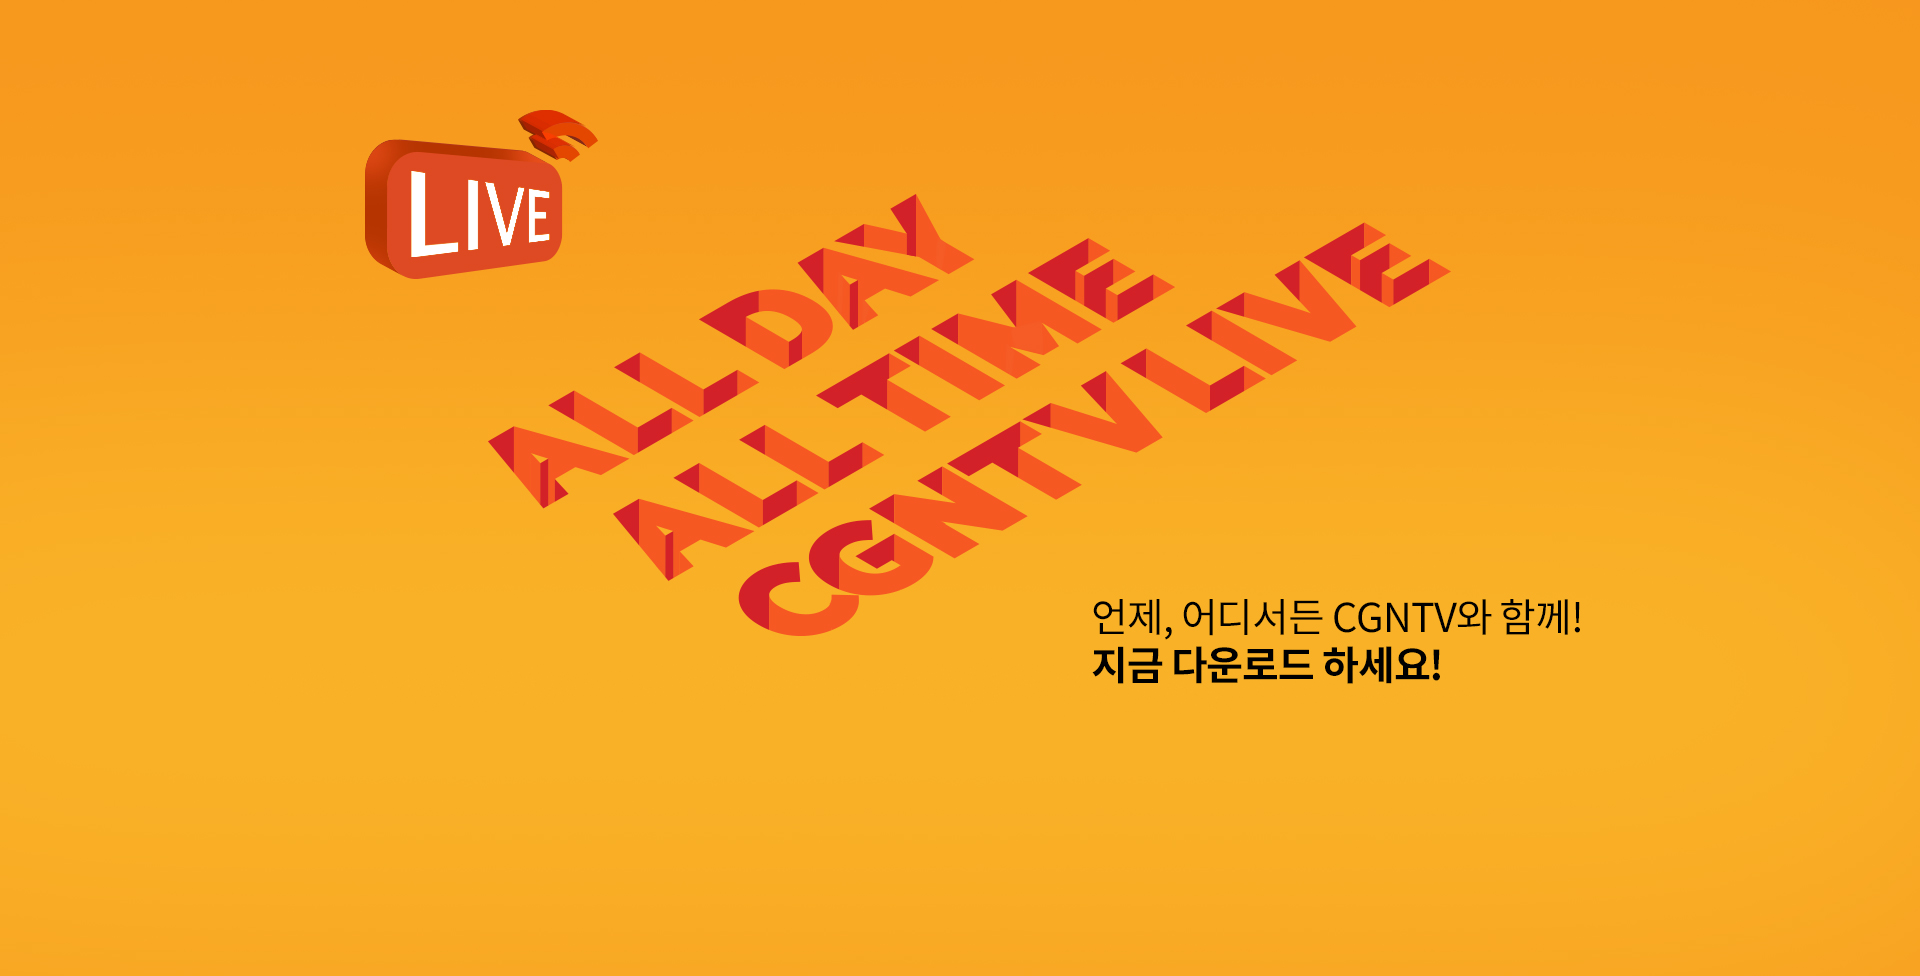 LIVE - ALL DAY ALL TIME CGNTVLIVE